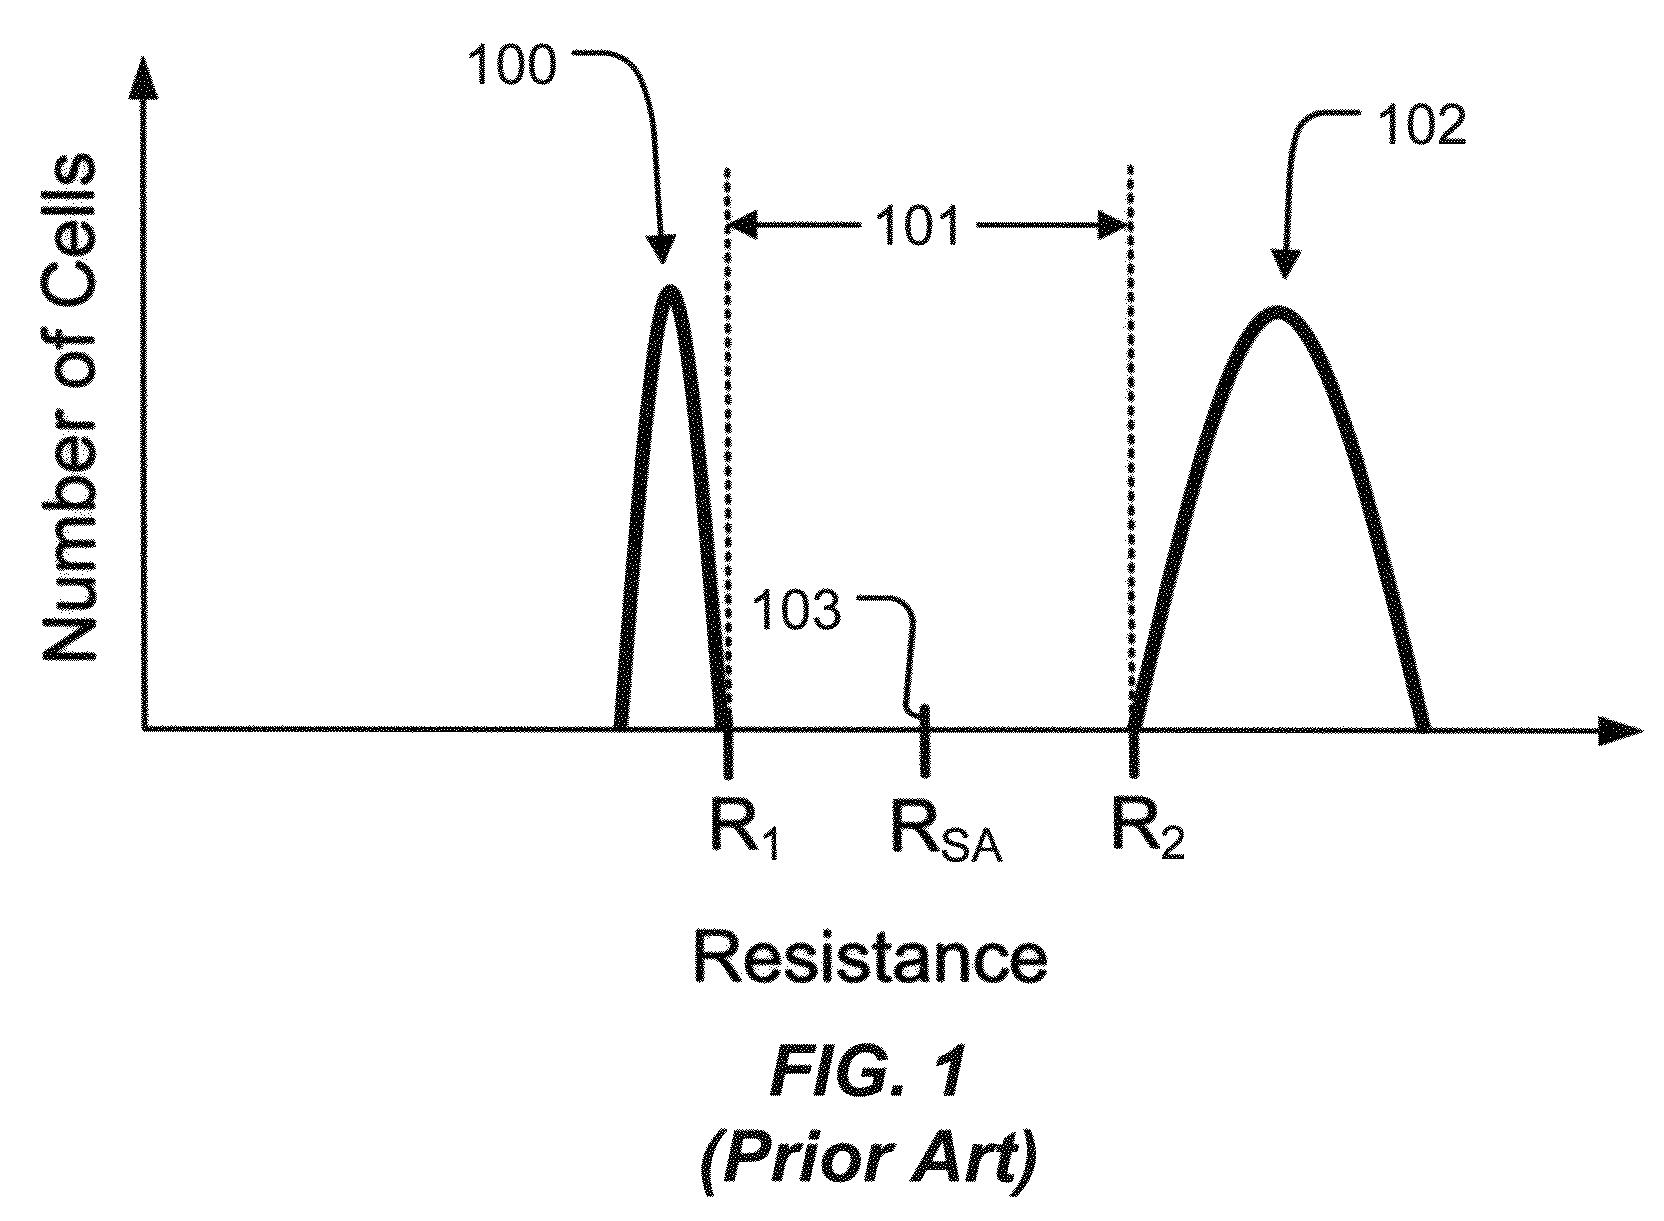 Dielectric mesh isolated phase change structure for phase change memory